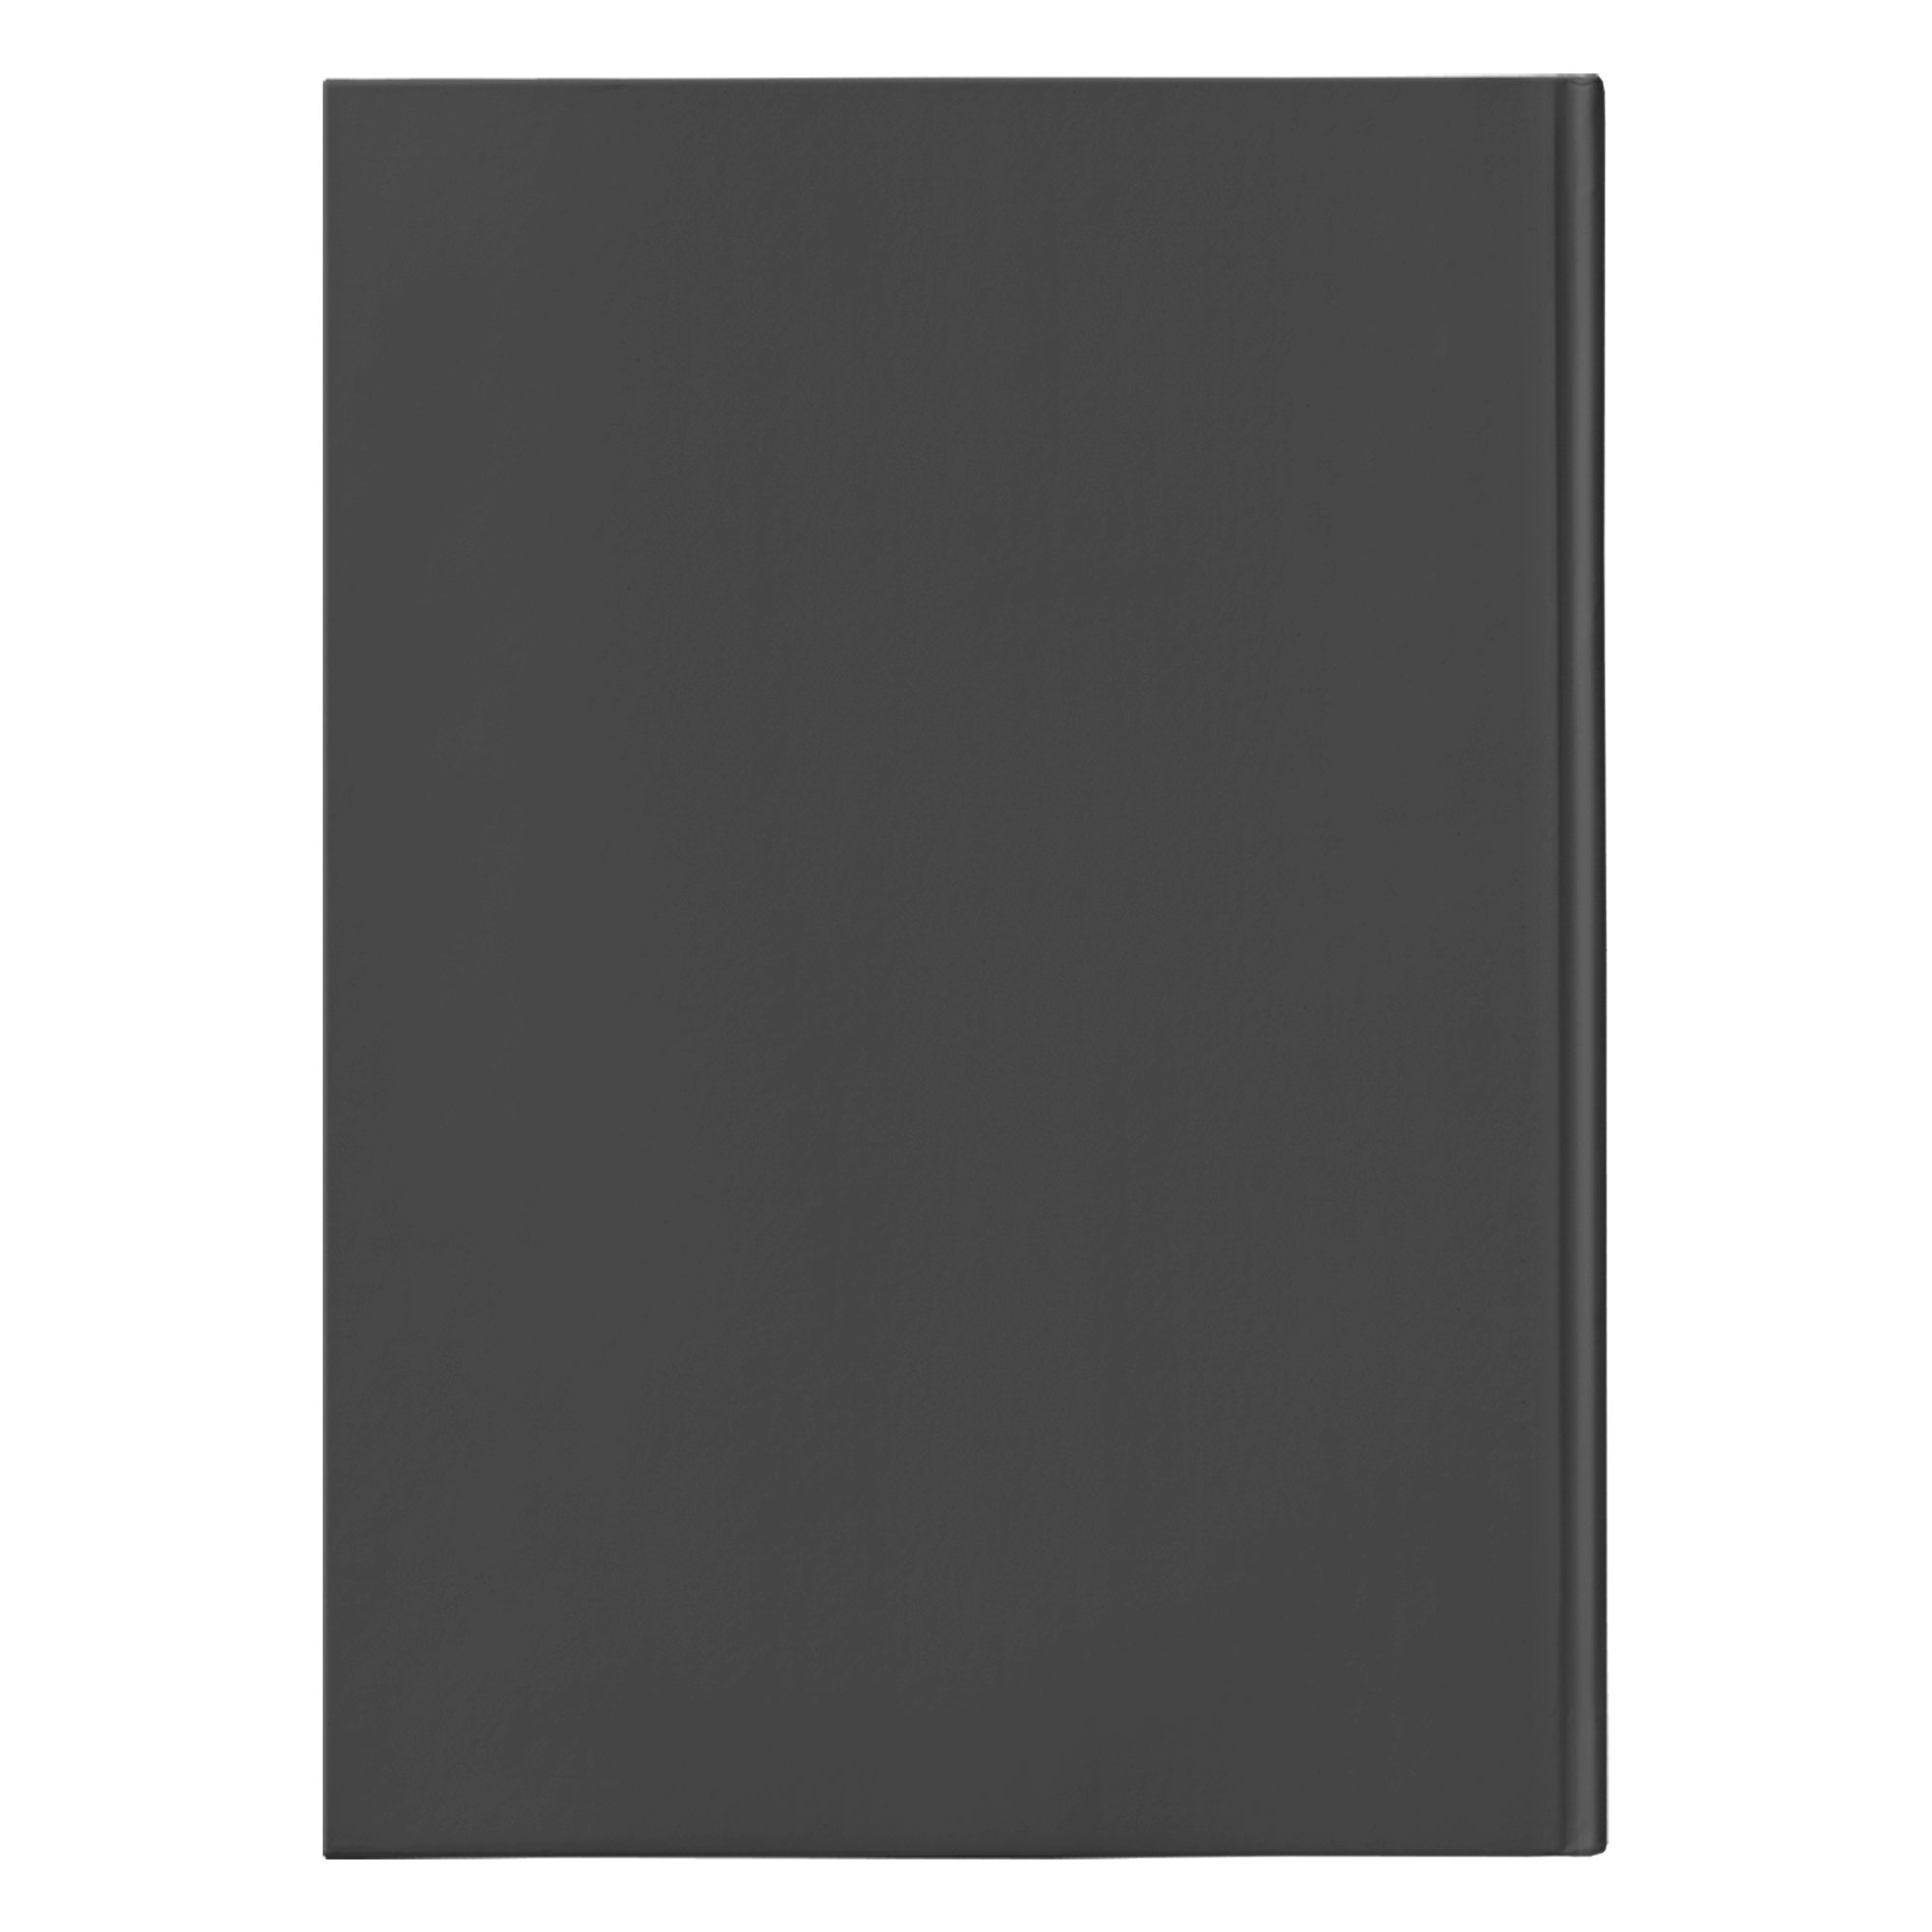 Nothing In My Hands (150 Page Hardcover Journal)